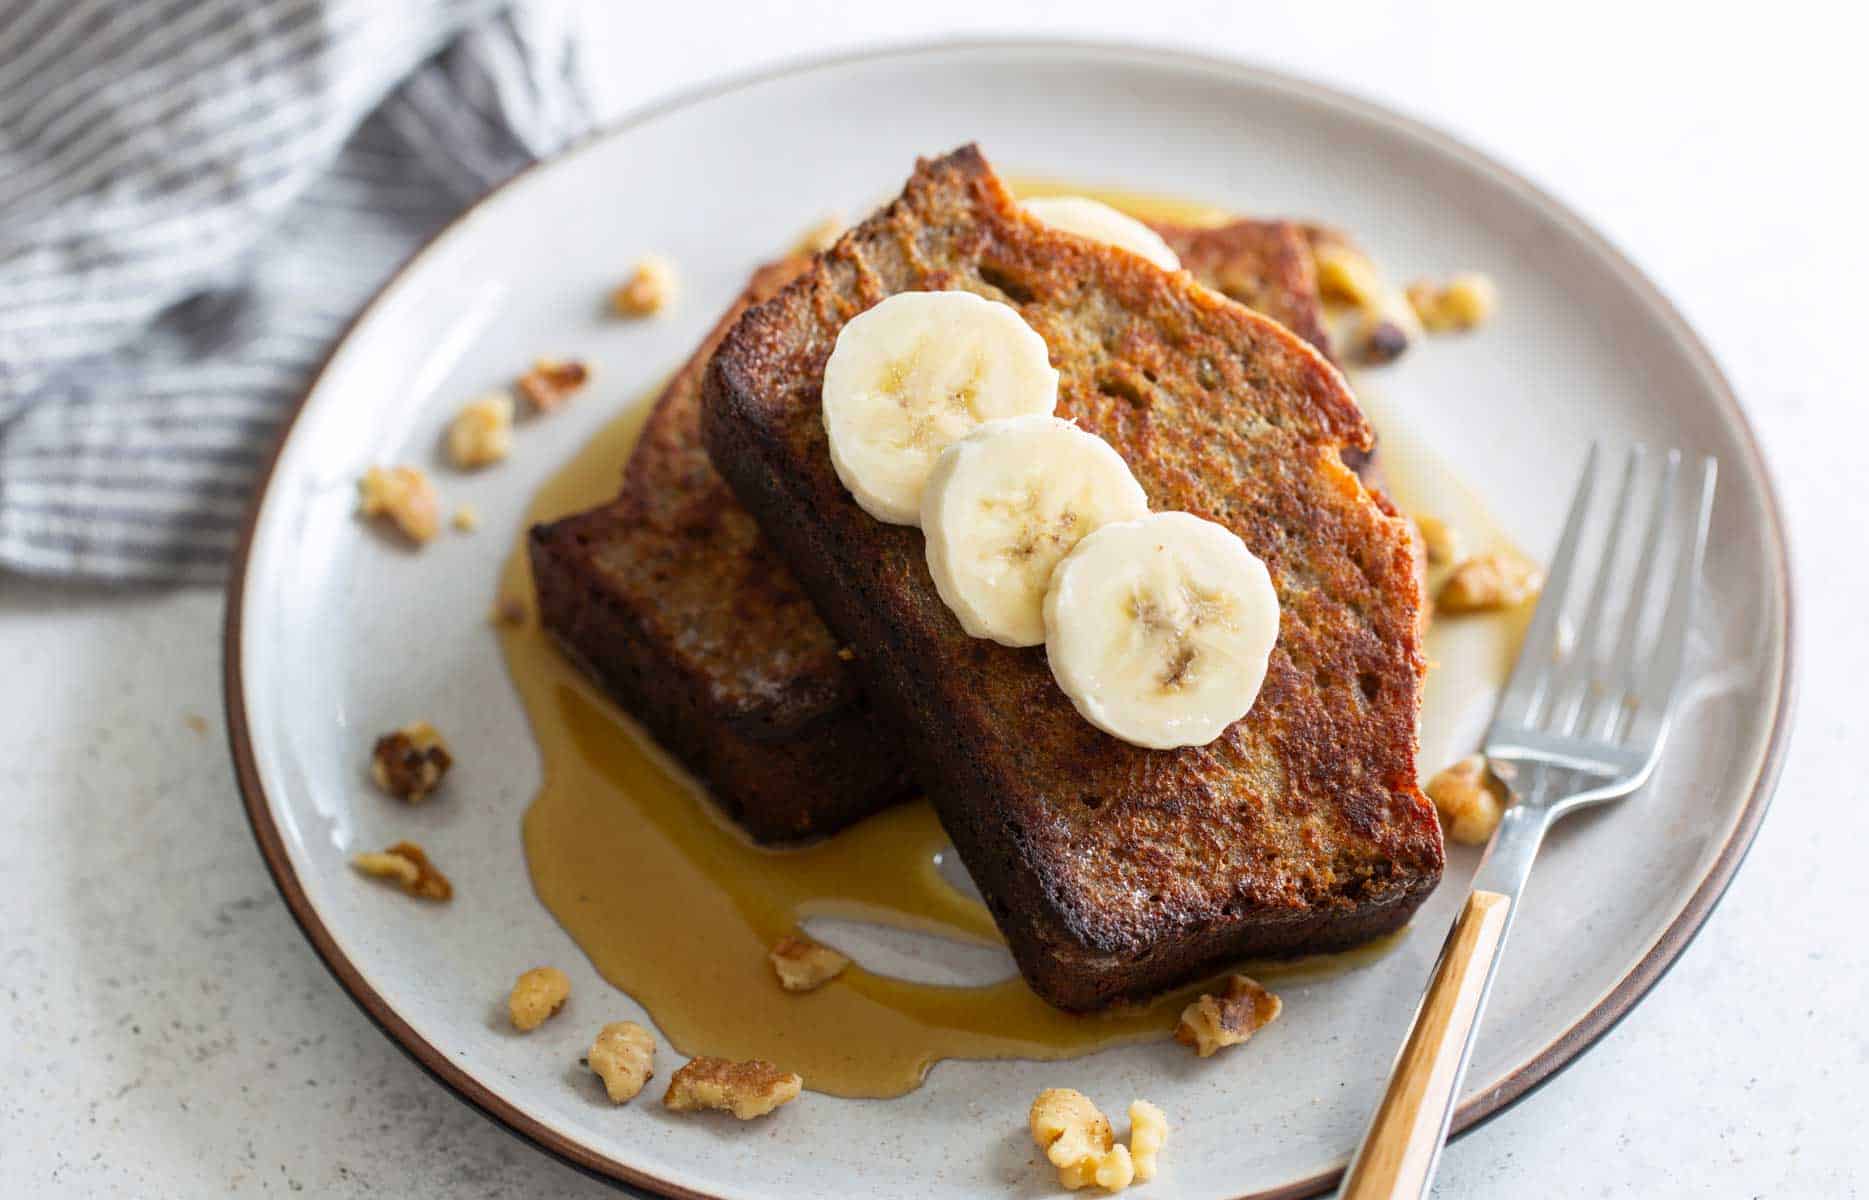 French toast with bananas and walnuts on a plate.